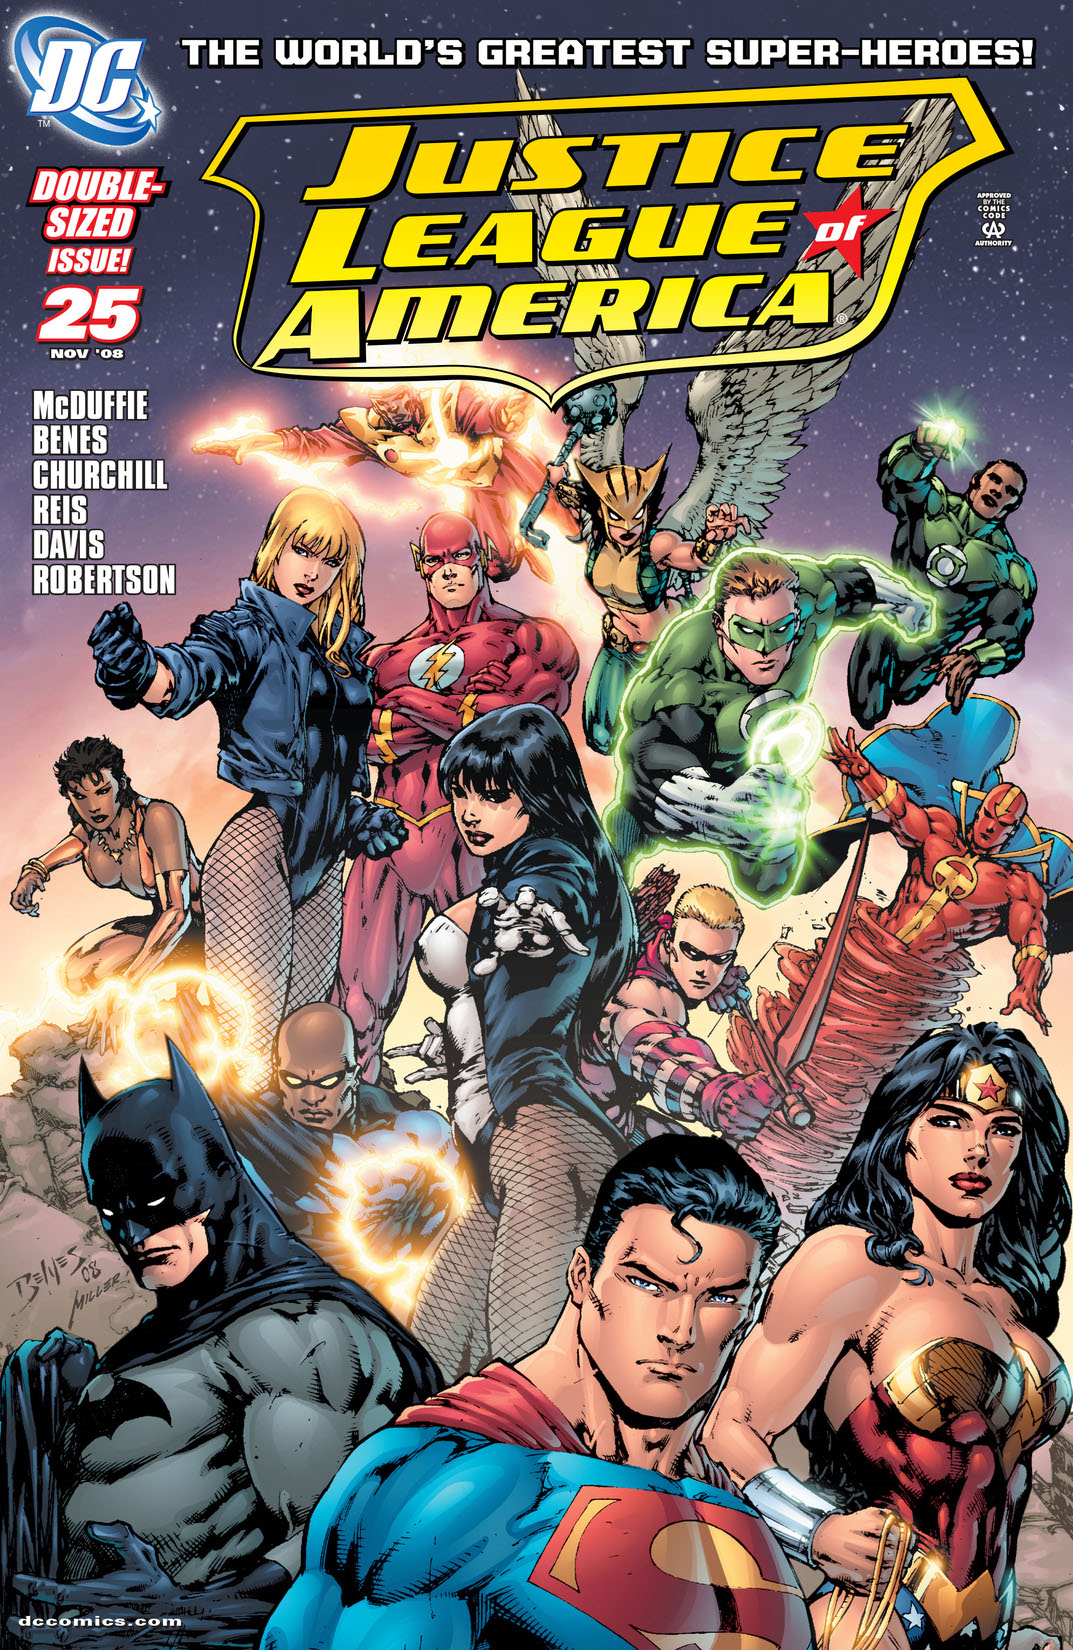 Justice League of America (2006-) #25 preview images